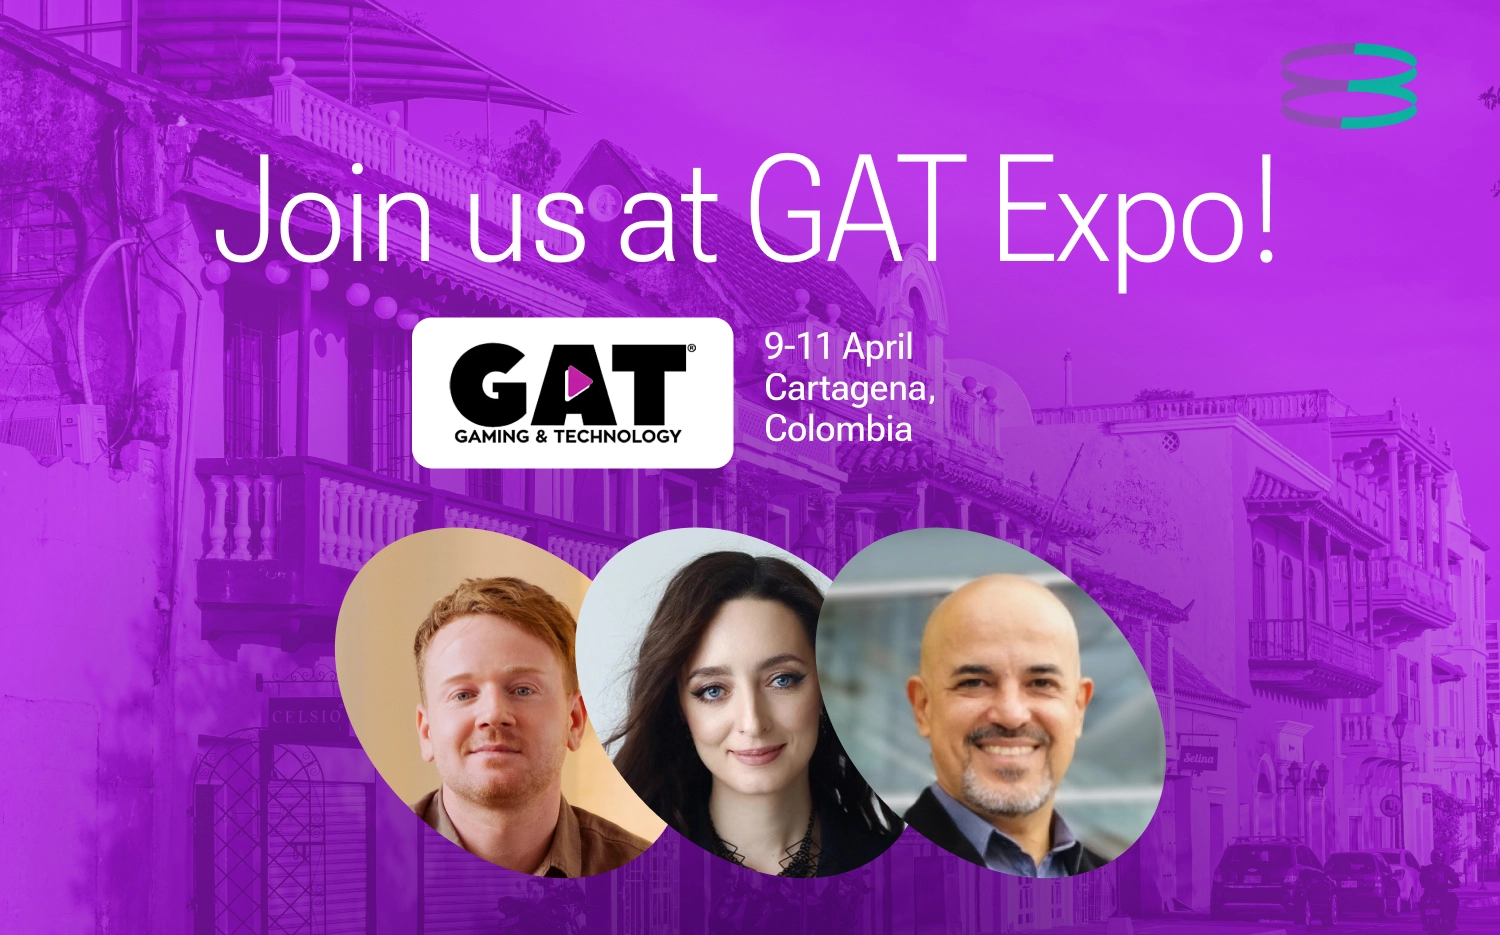 Join the EvenBet team at GAT Expo Cartagena